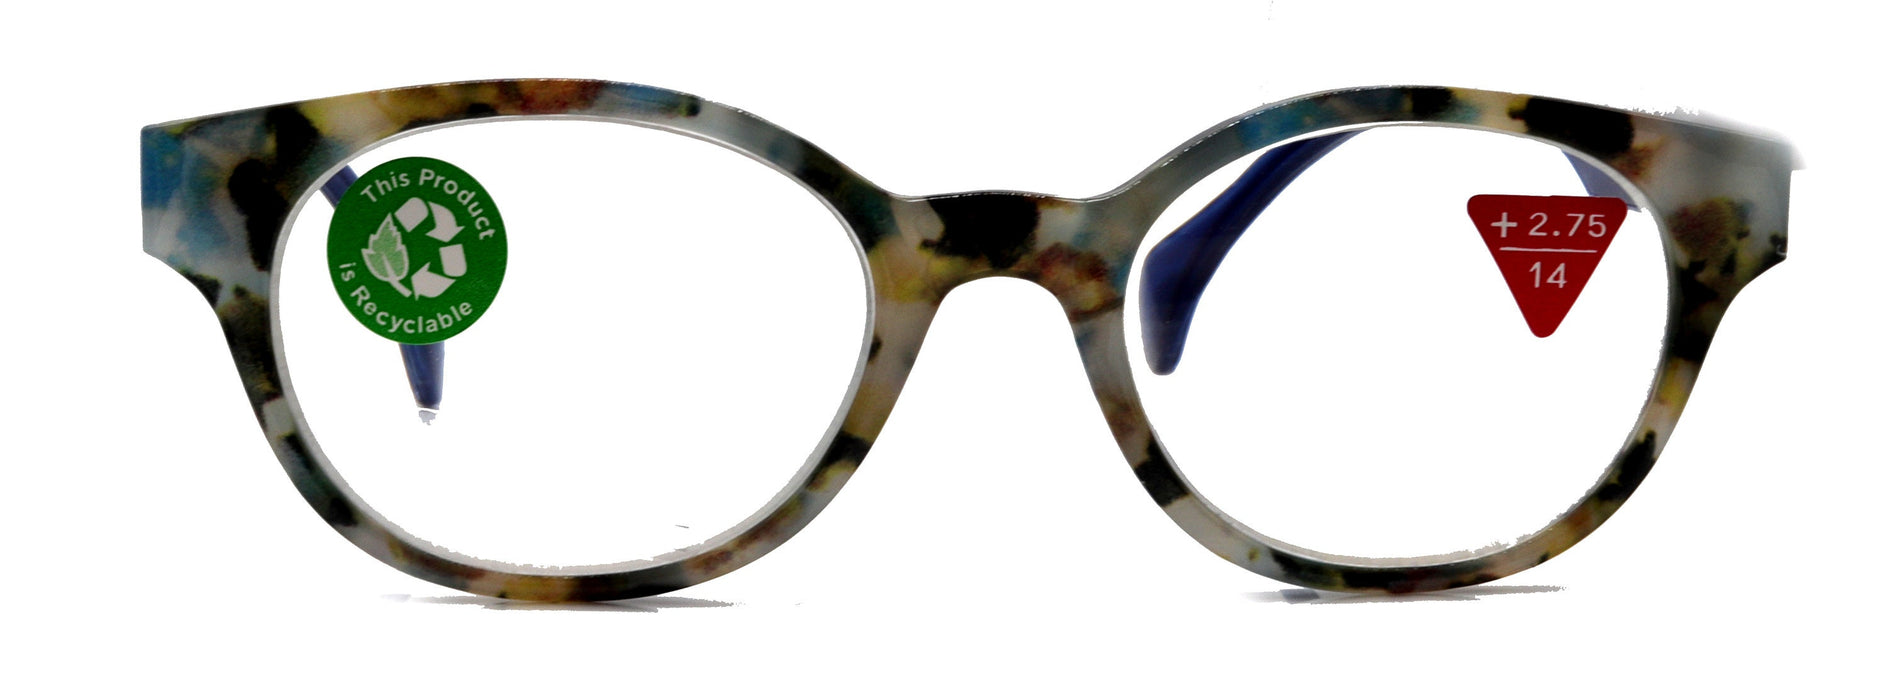 Sally, (Premium) Reading Glasses, High End Readers +1.25..+3 Magnifying Glasses, Round Optical Frames (Tortoise Brown Blue) NY Fifth Avenue.